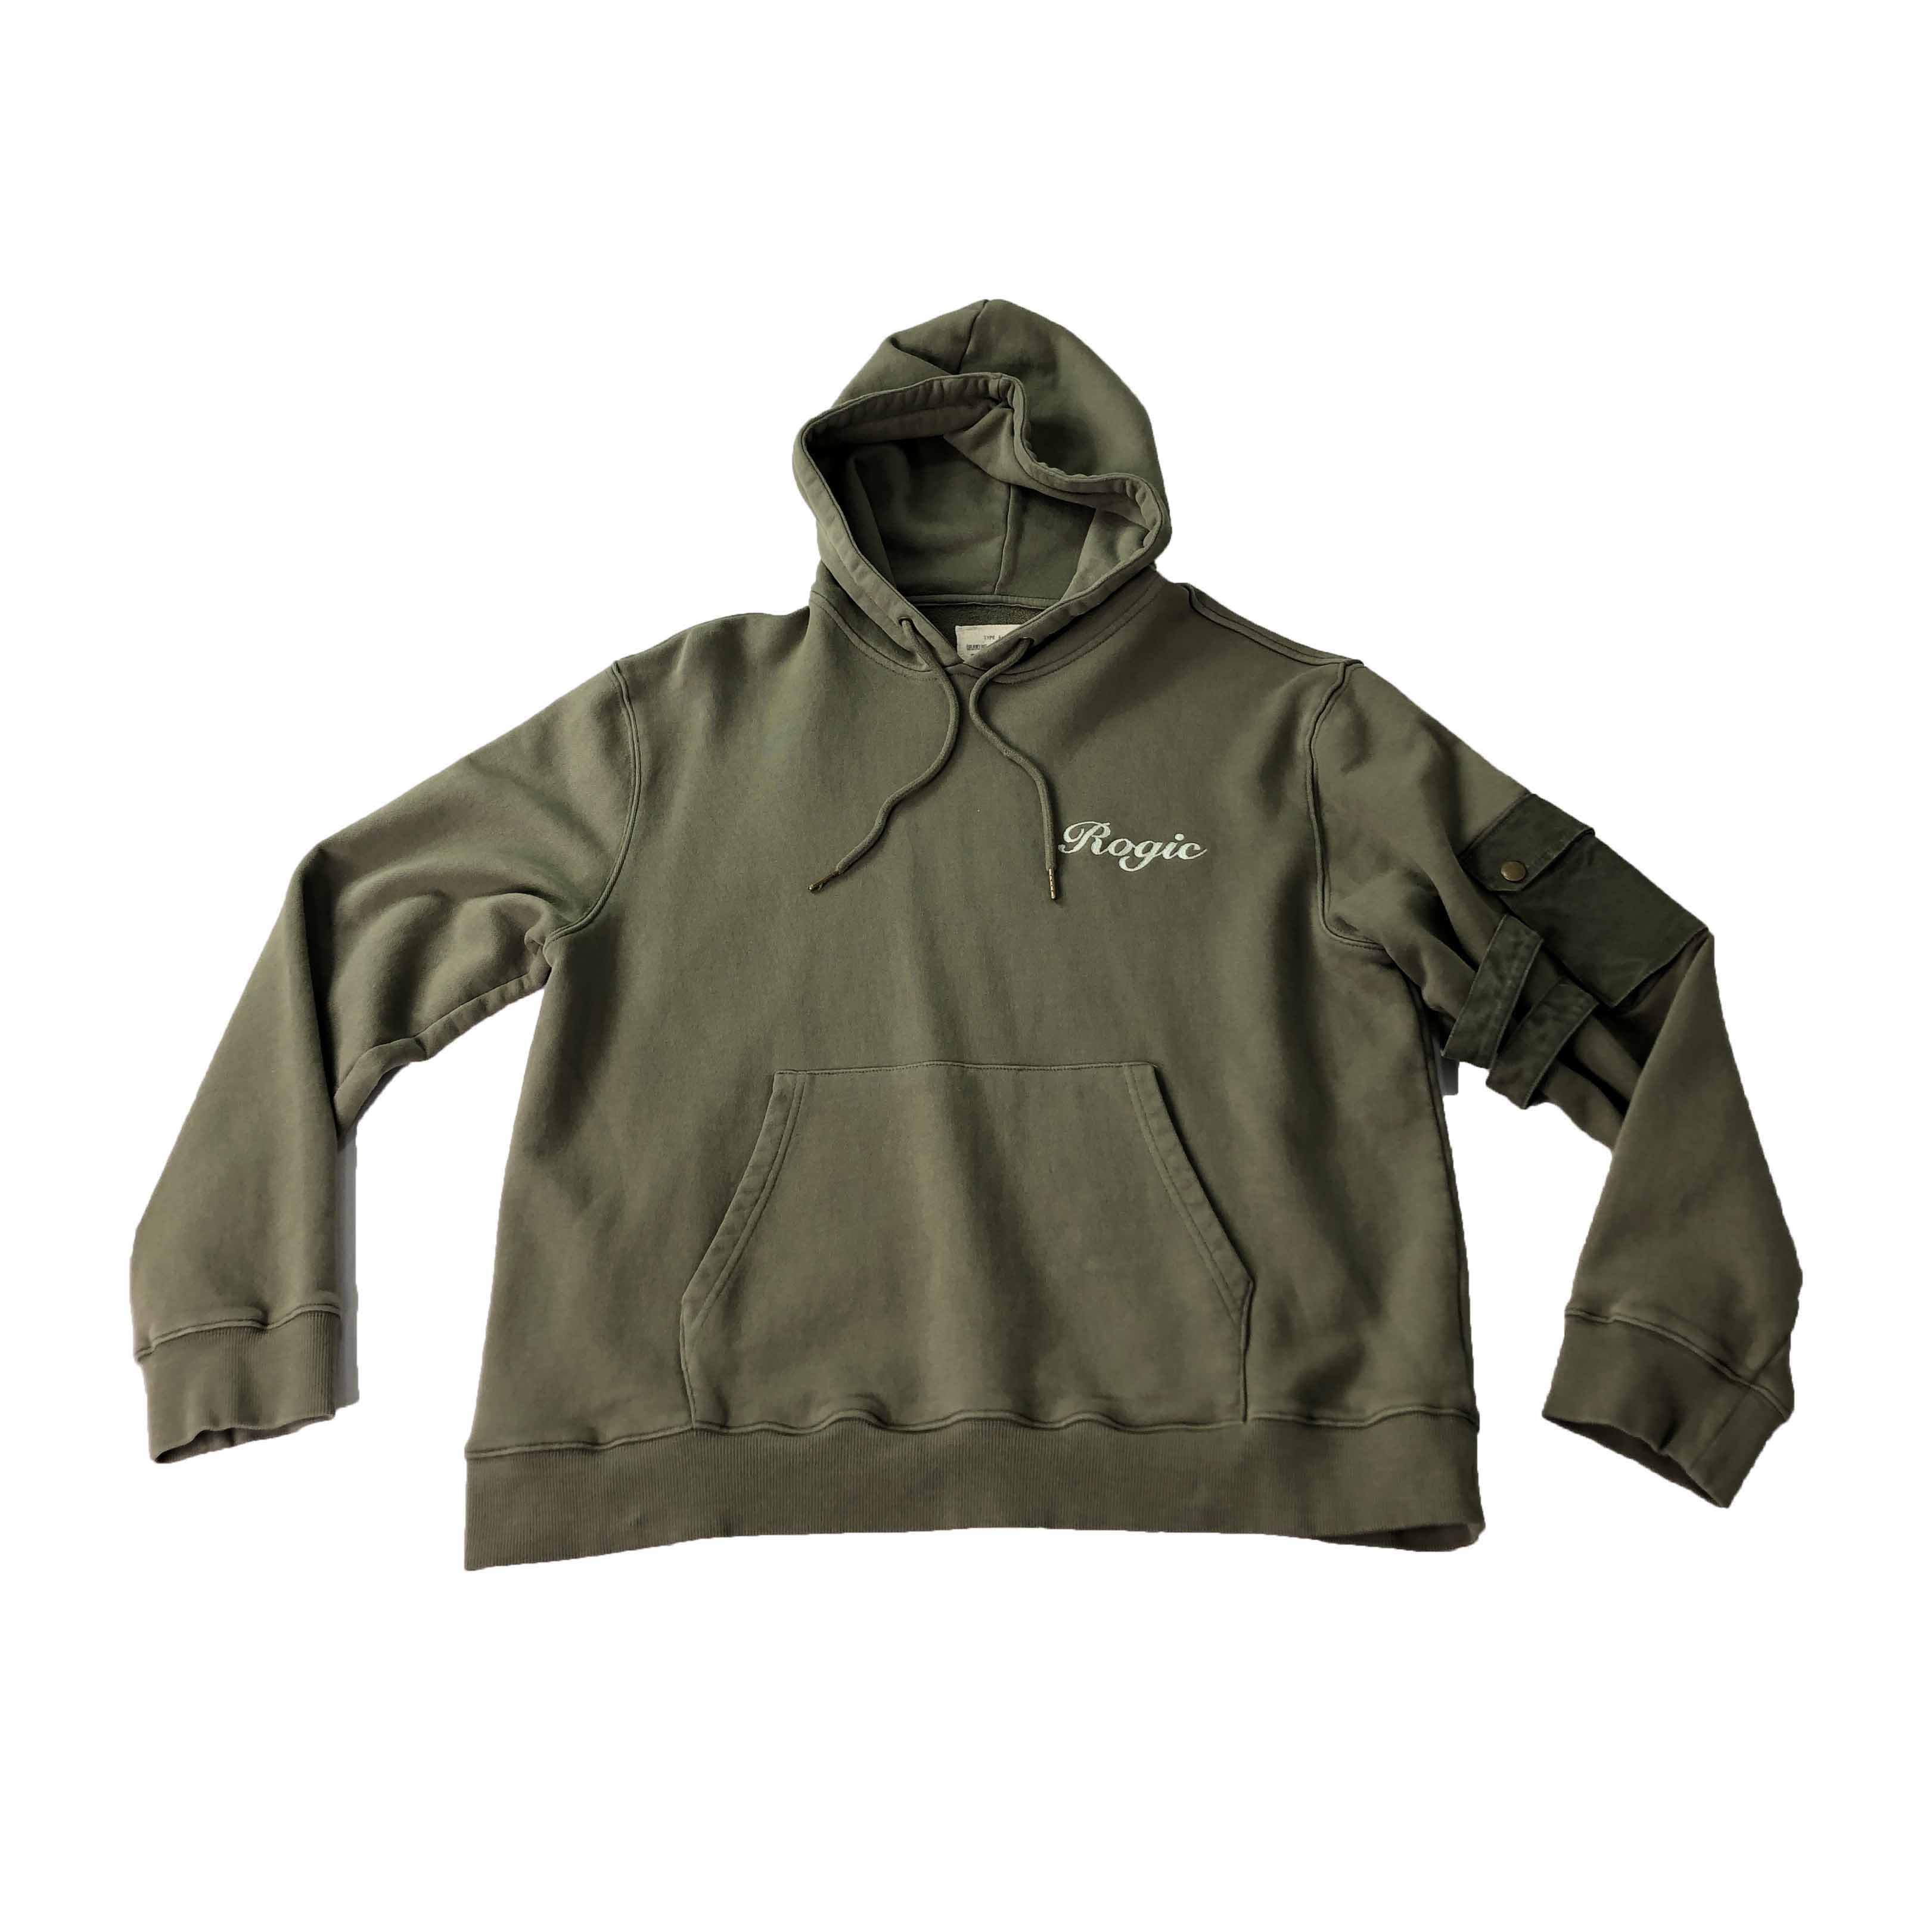 [Rogic] Millitary Hoodie KH - Size S